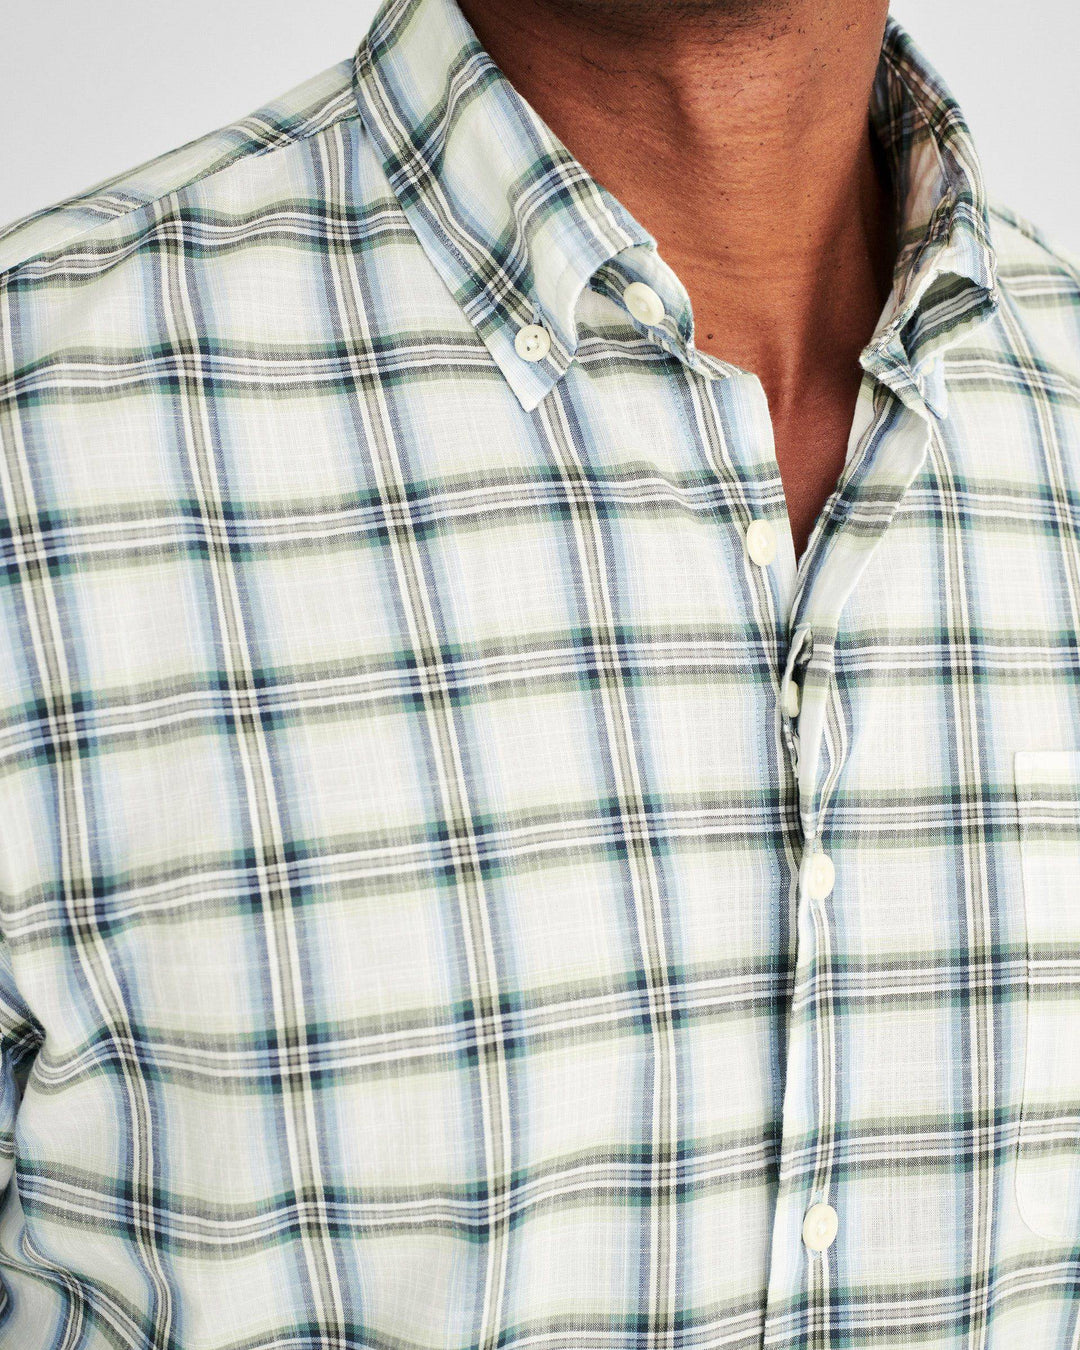 Johnnie-O Cruise Hangin' Out Button Up Shirt